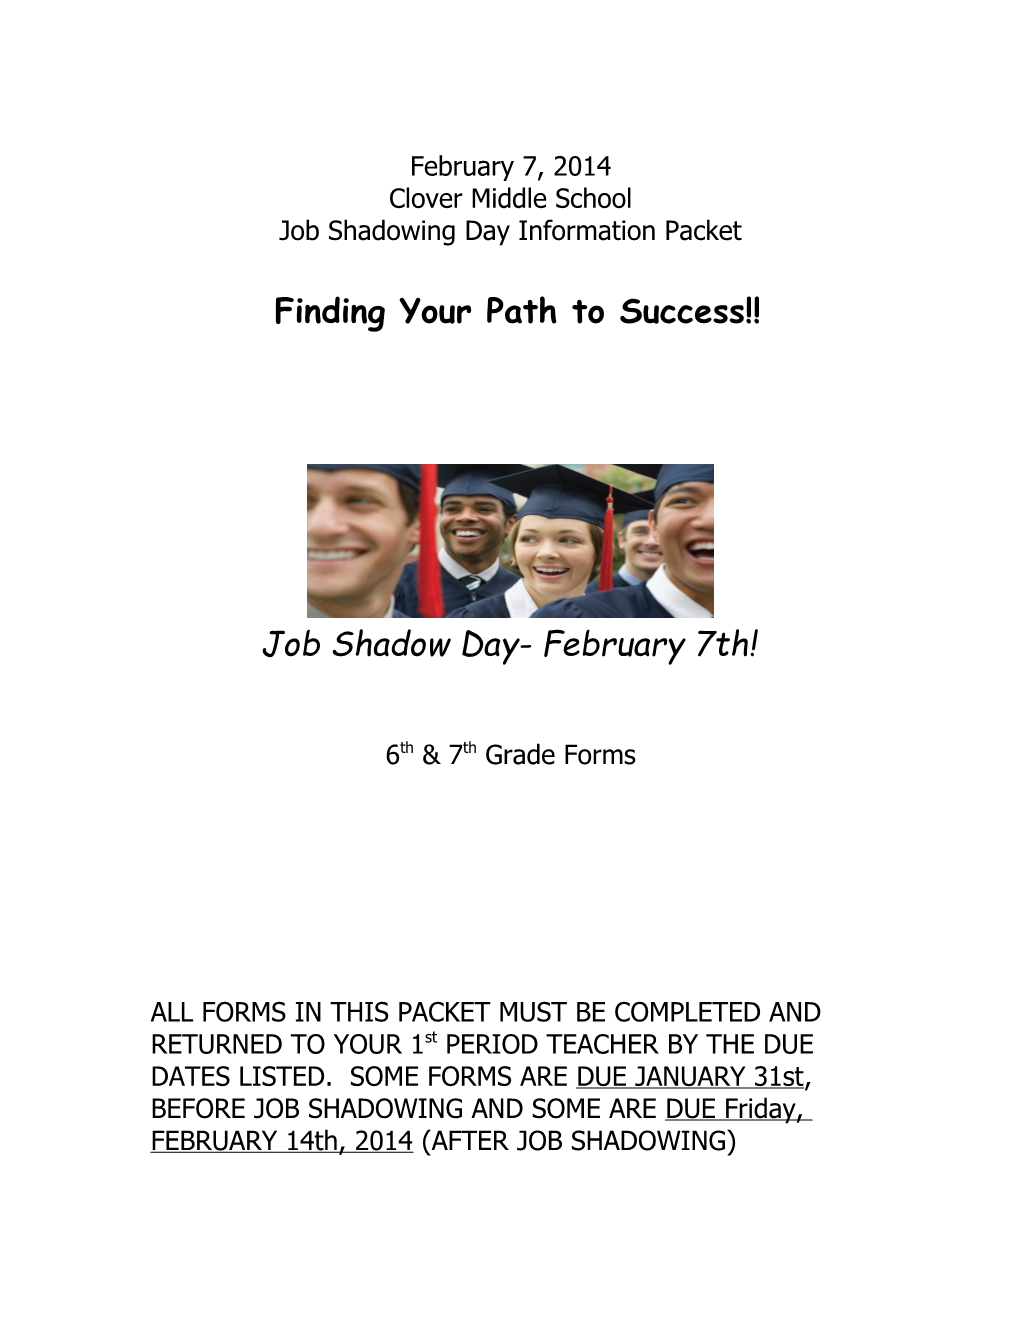 Permission to Participate in the FMMS Job Shadowing Day